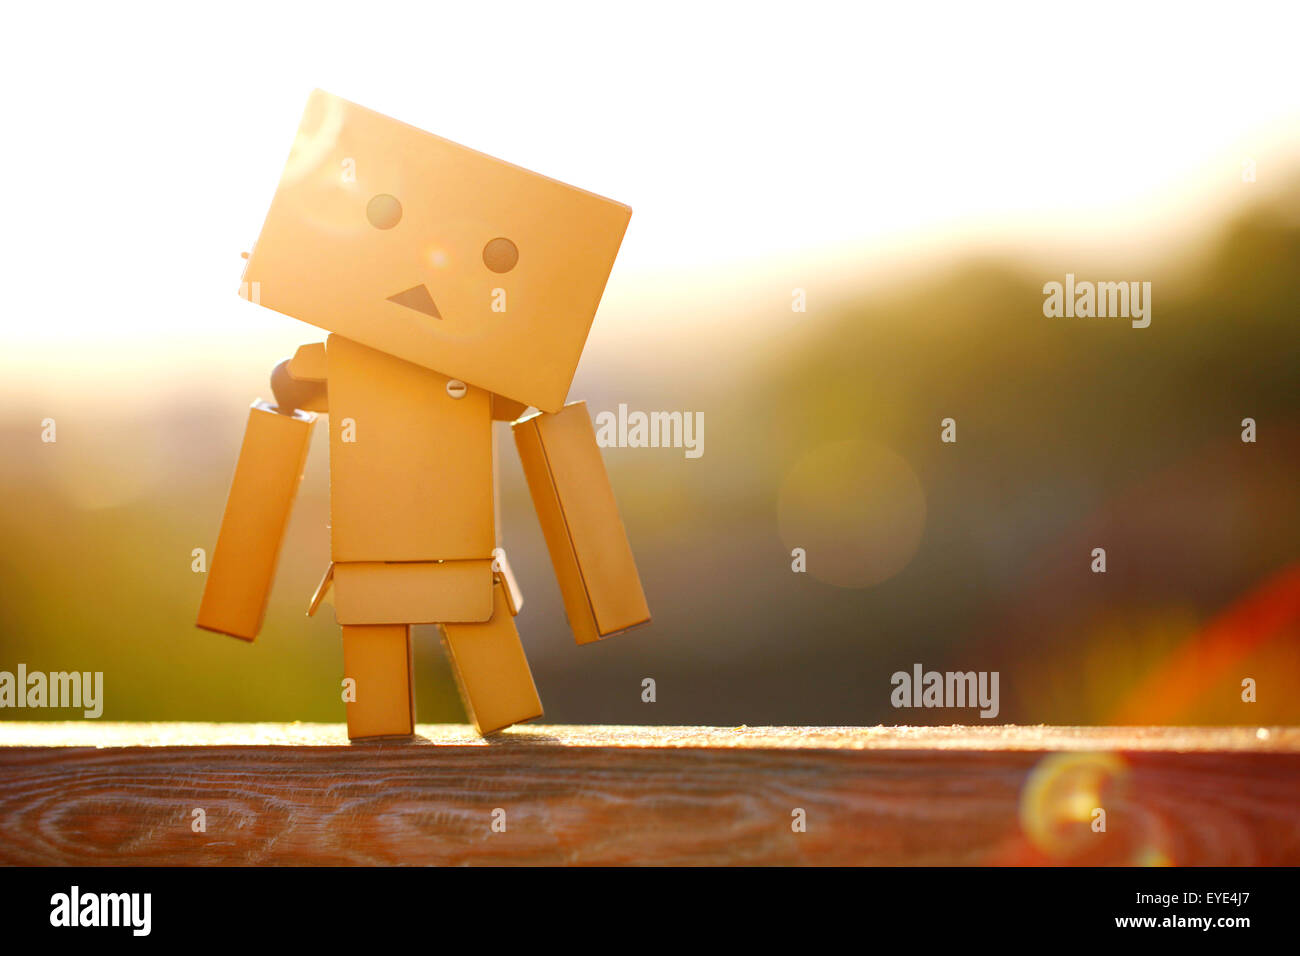 A Manga Japanese toy Danbo Danboard robot character posed for a portrait picture on a warm sunny morning. is a fictional cardboard box robot character Stock Photo